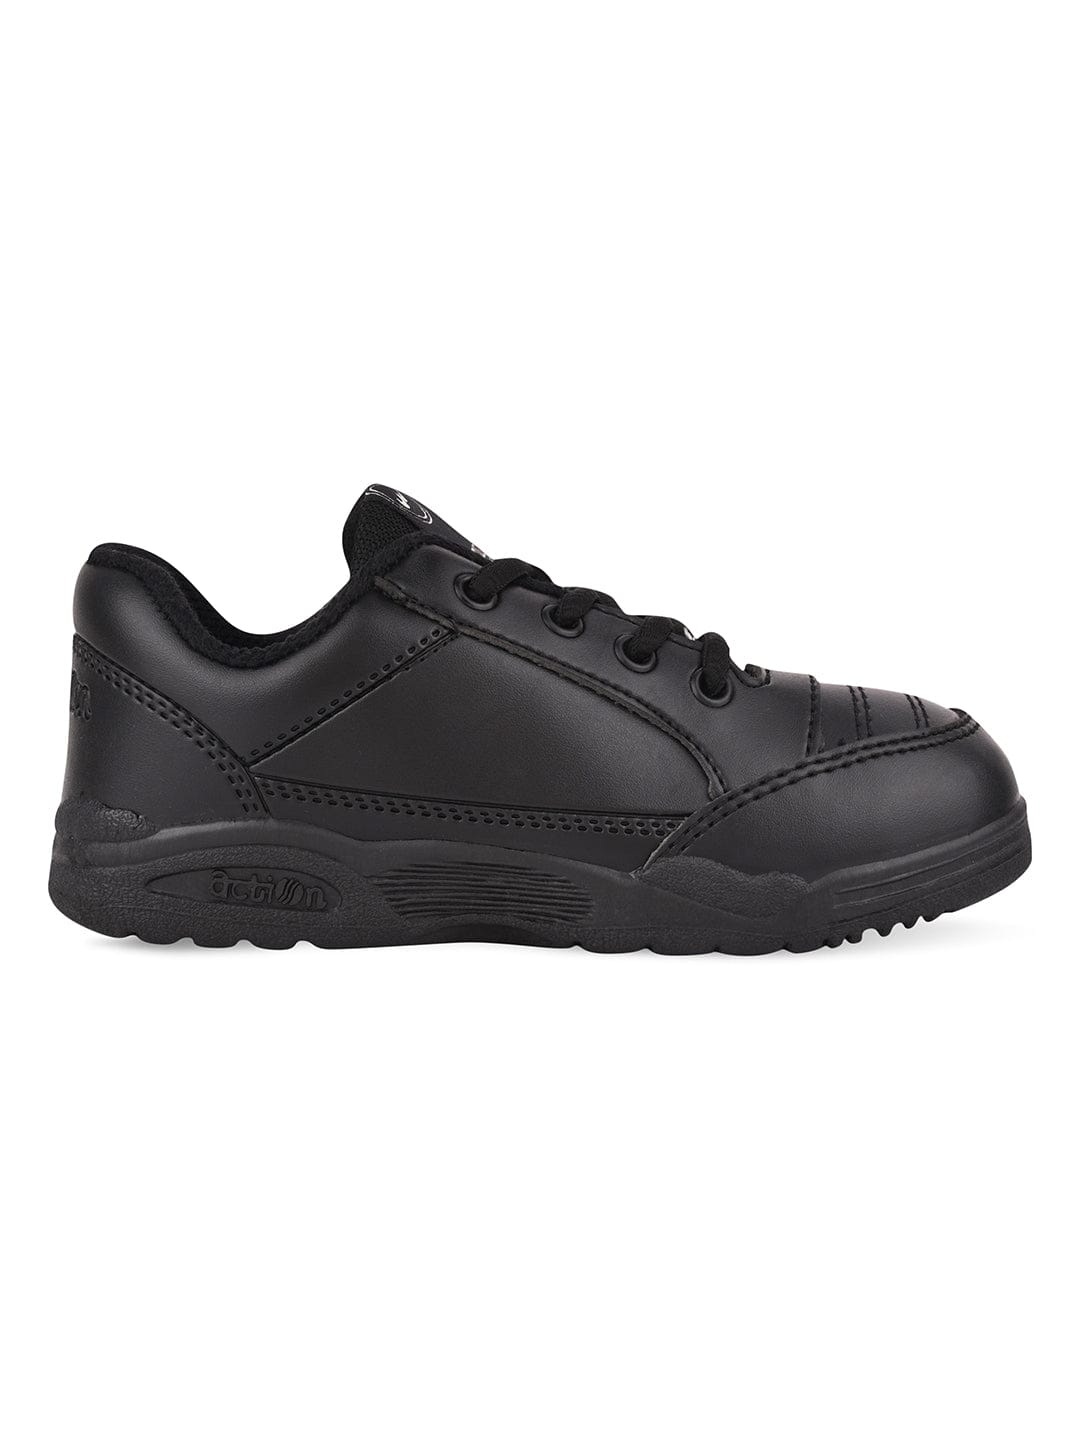 TeRm Class Leather Boy's School Shoes in 10 Sizes | Costc...